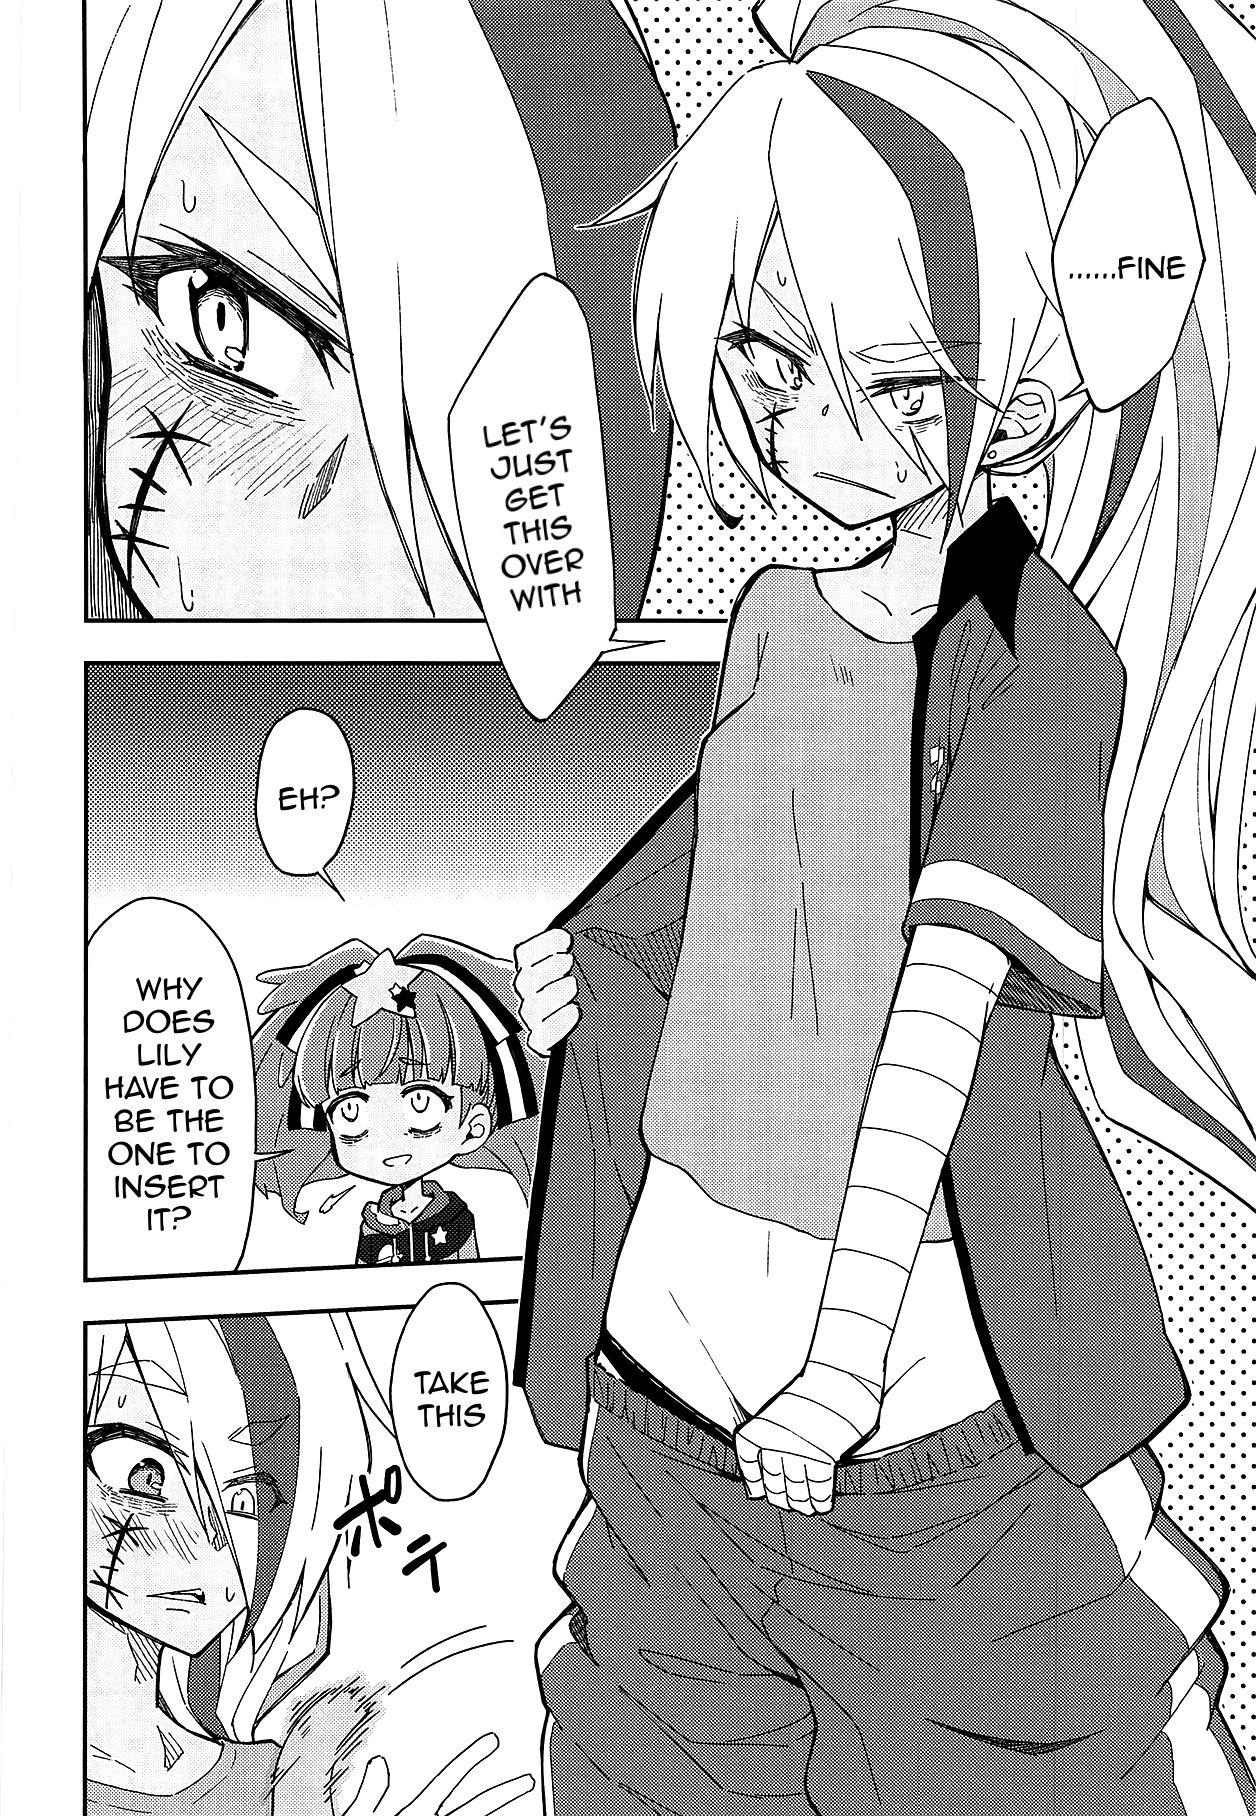 Inked Lovely Girls' Lily Vol. 18 - Zombie land saga Colombiana - Page 6